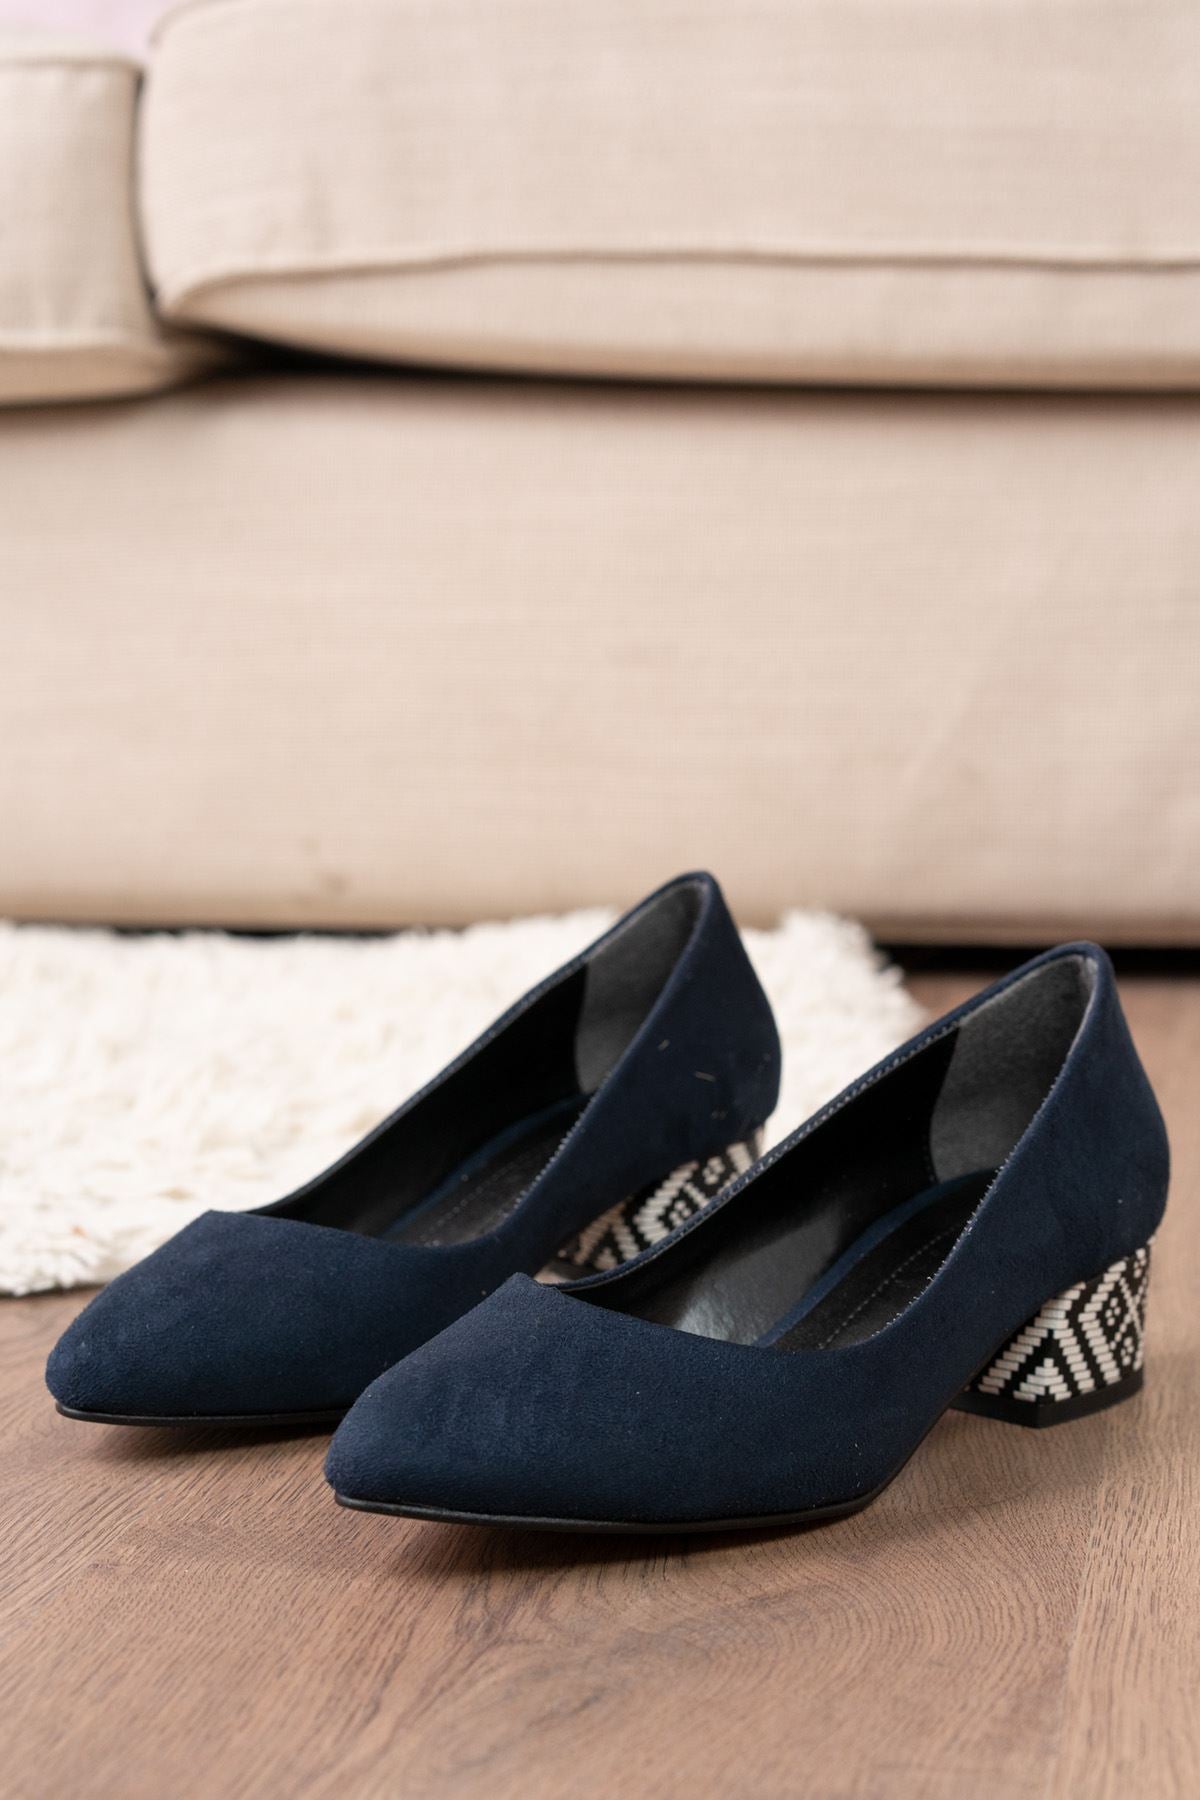 Women's Fori Navy Blue Suede Heeled Shoes - STREETMODE ™